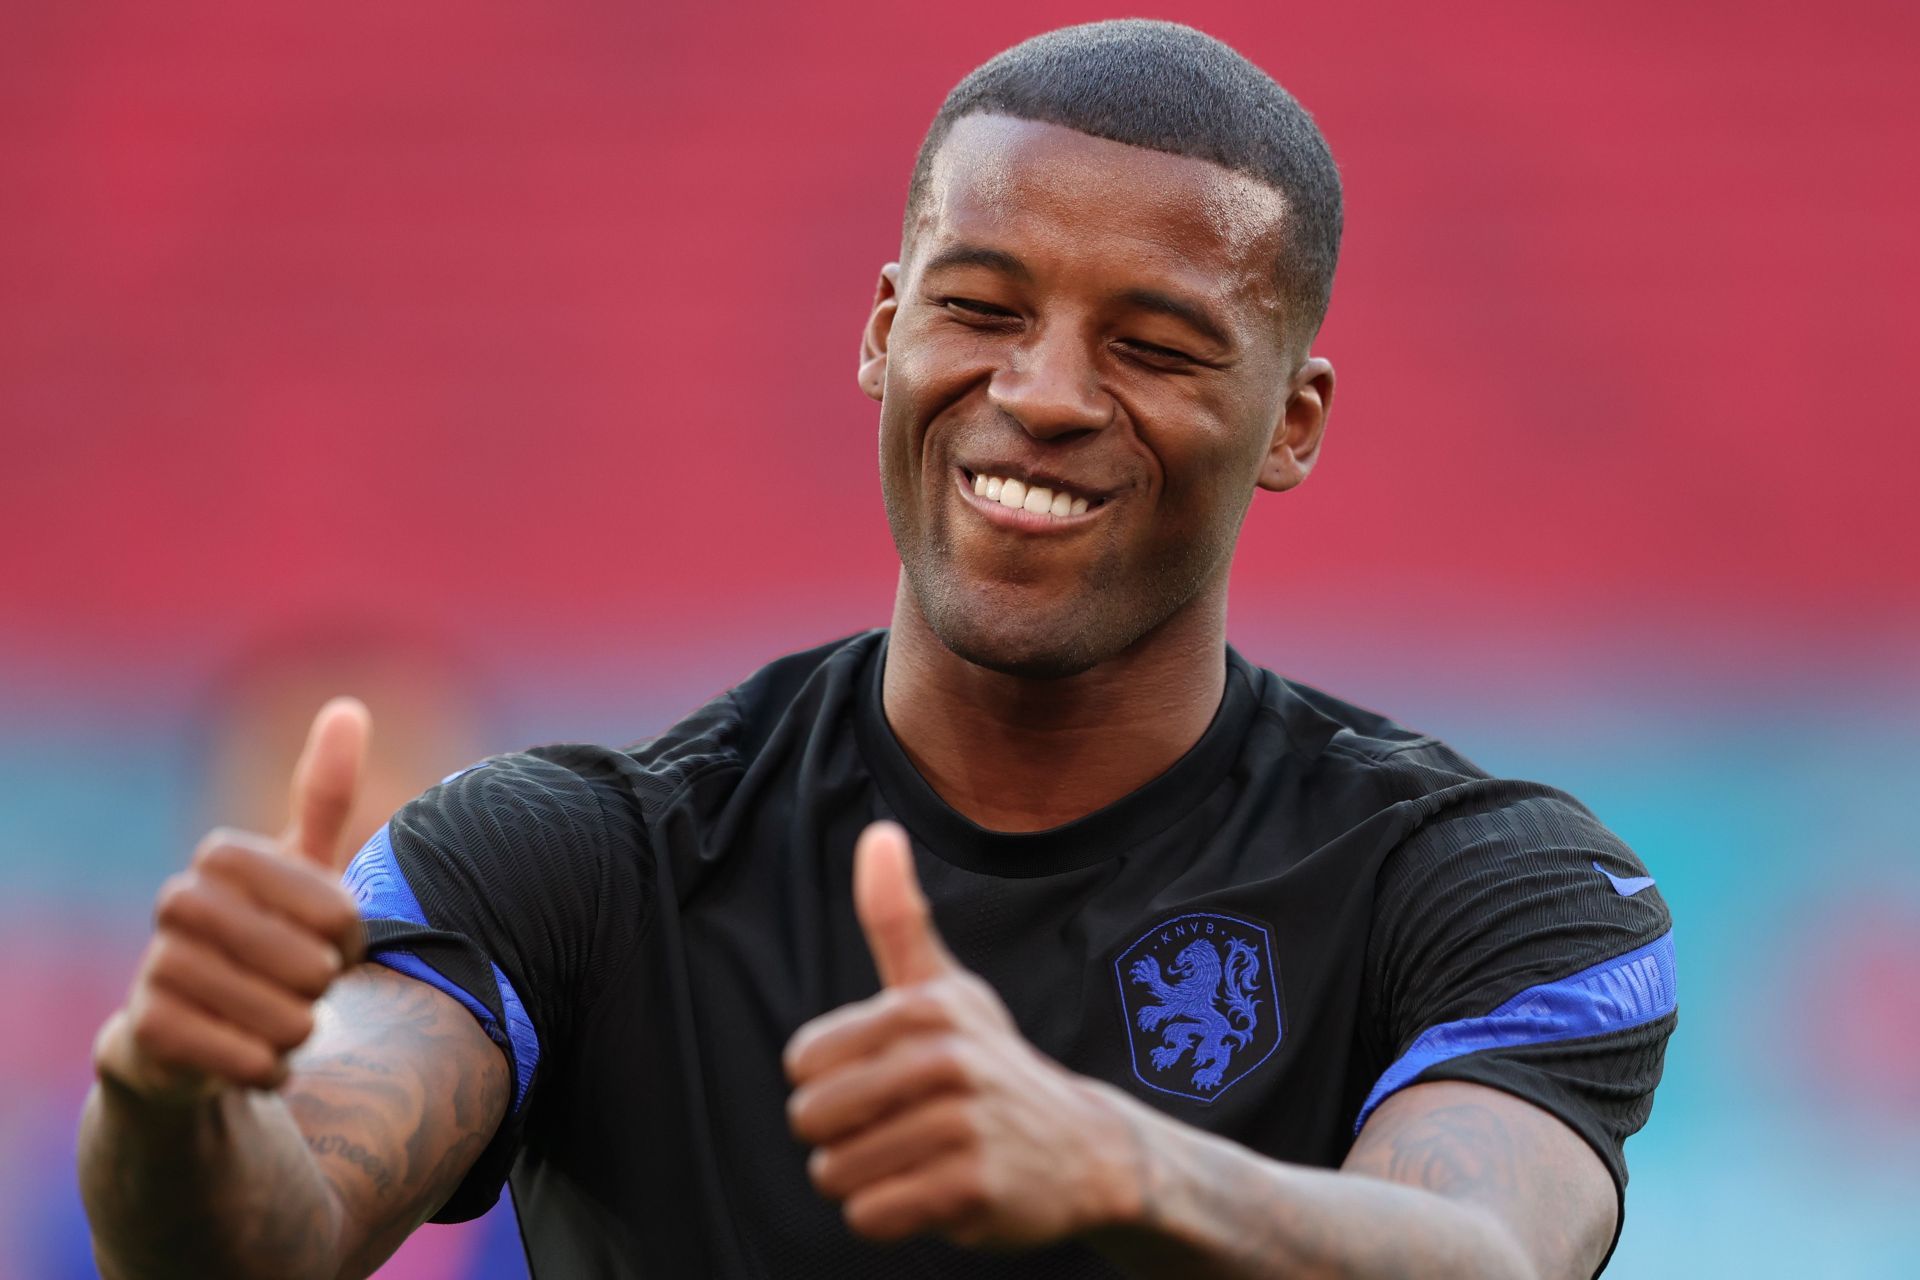 Georginio Wijnaldum has struggled to settle down at PSG and is being monitored by Arsenal and Tottenham Hotspur